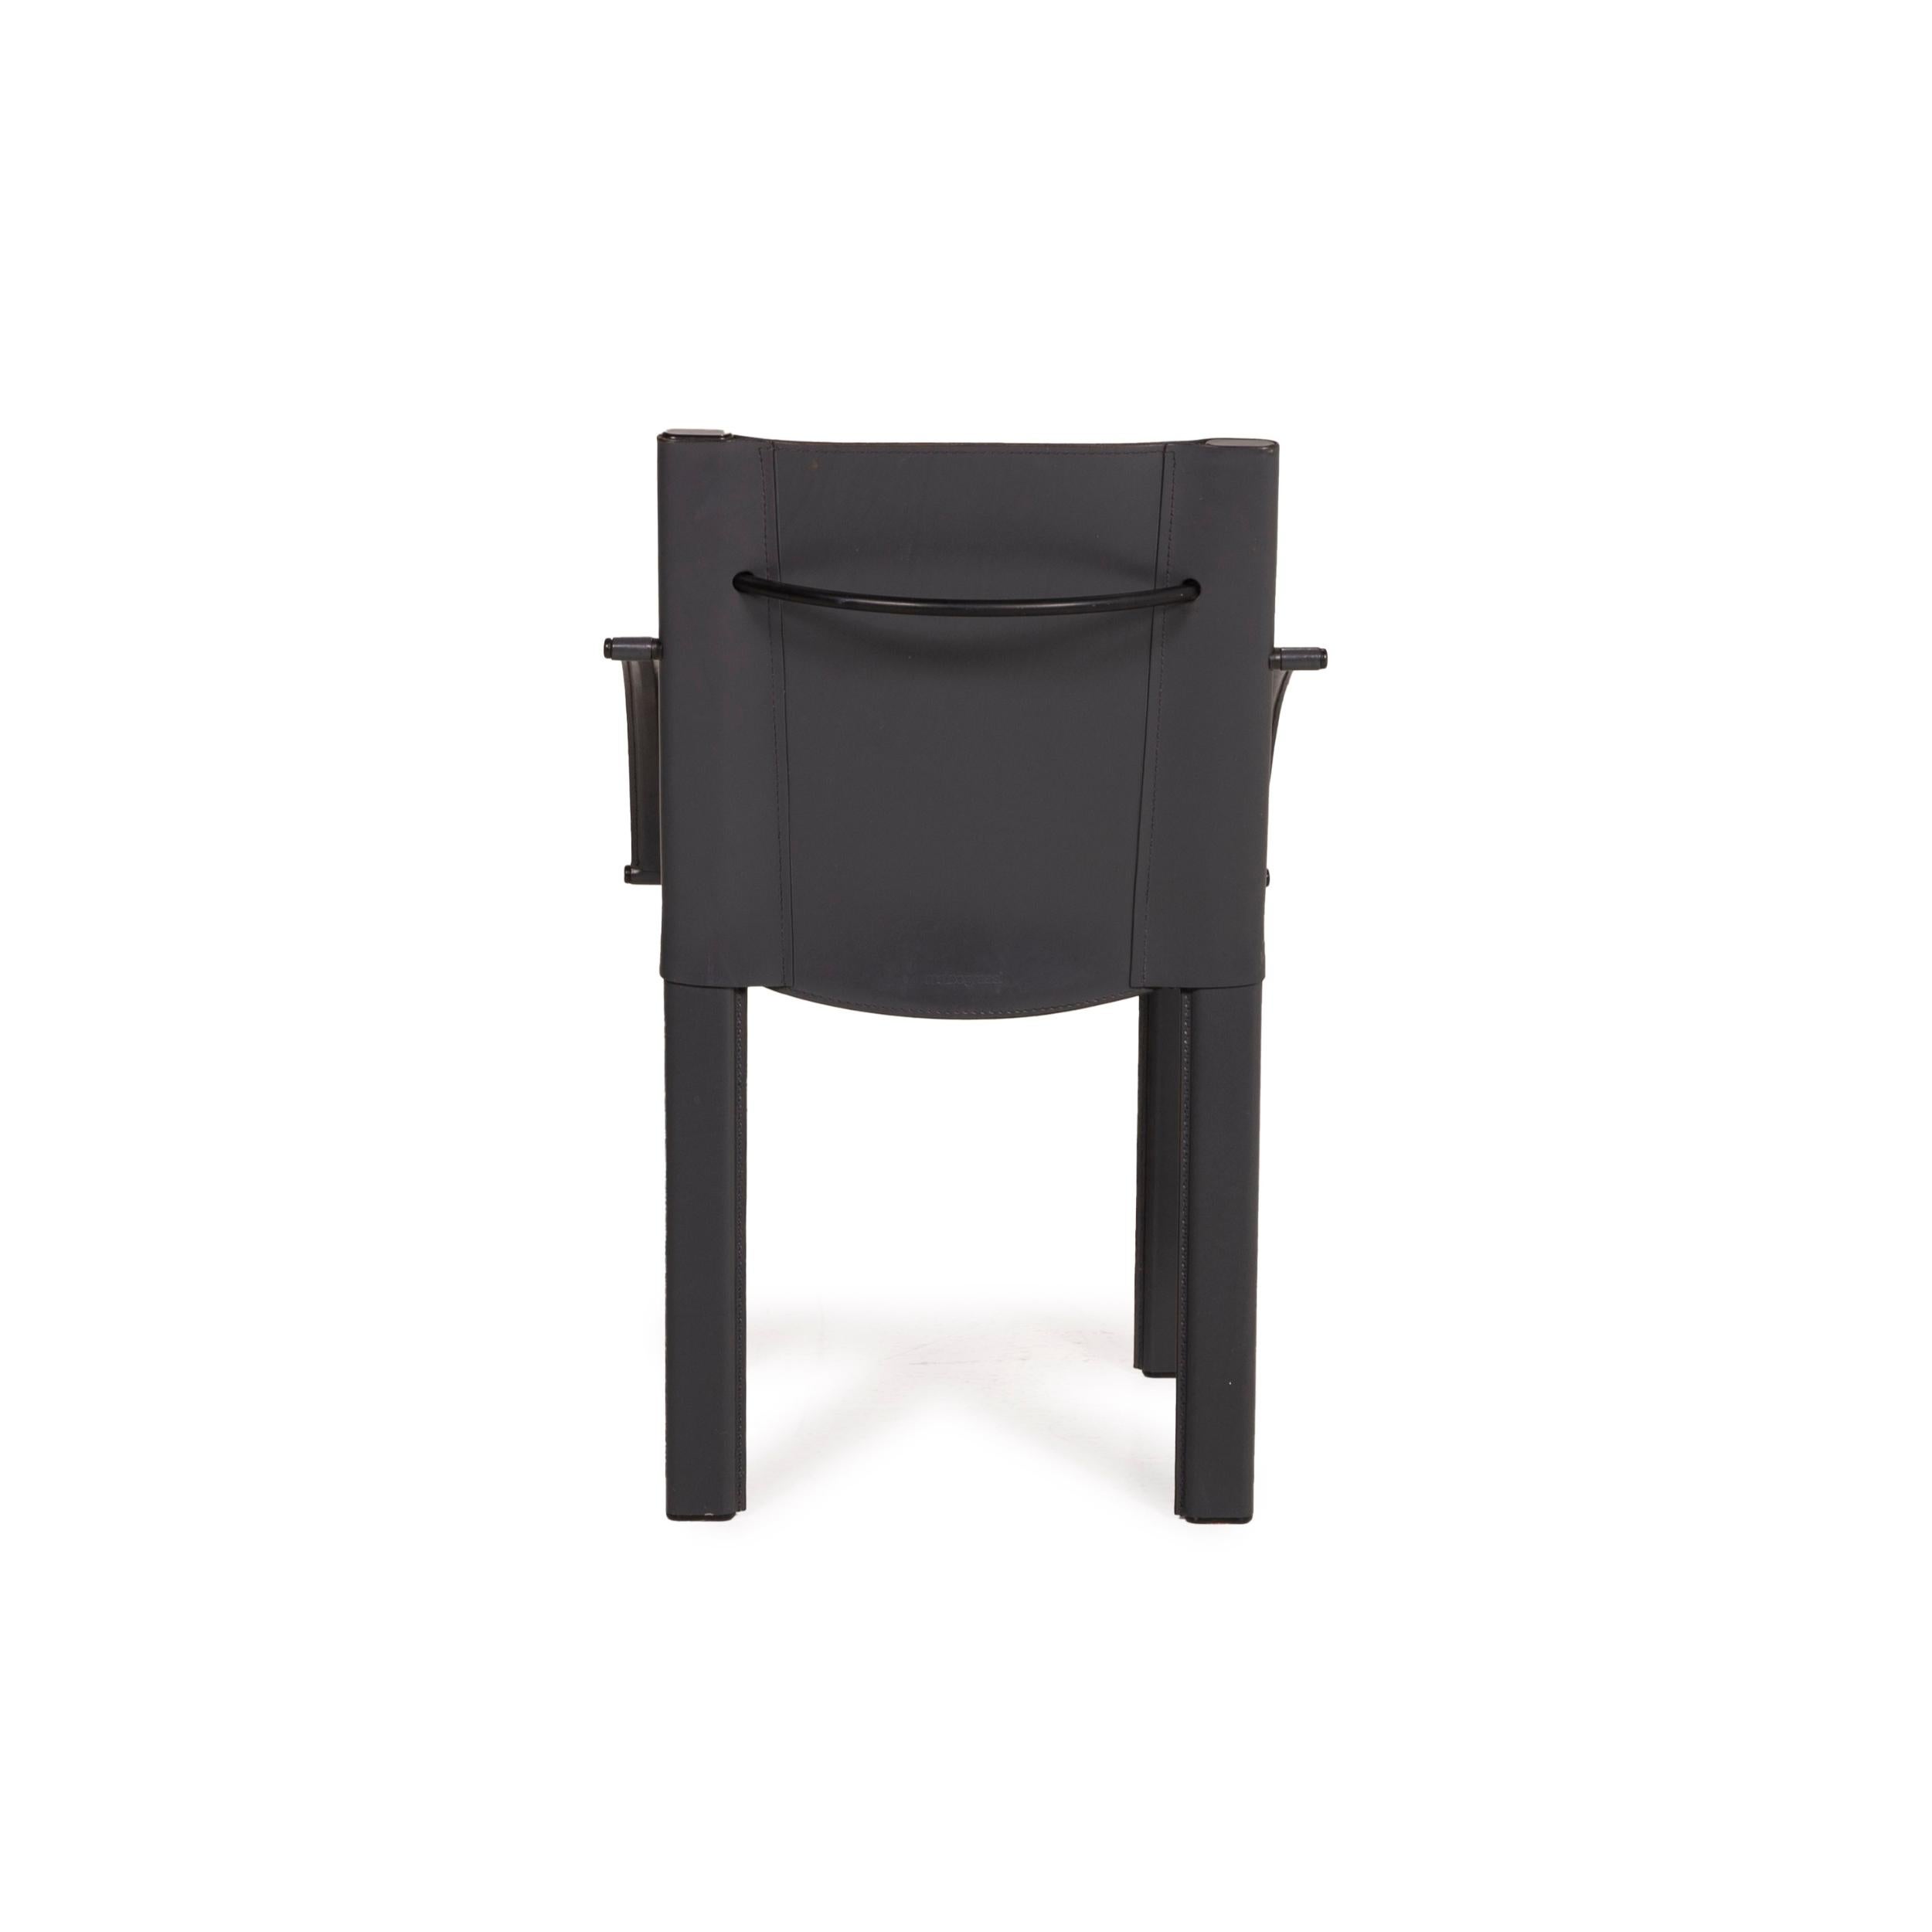 Matteo Grassi Leather Chair Black Vintage Armchair For Sale 5